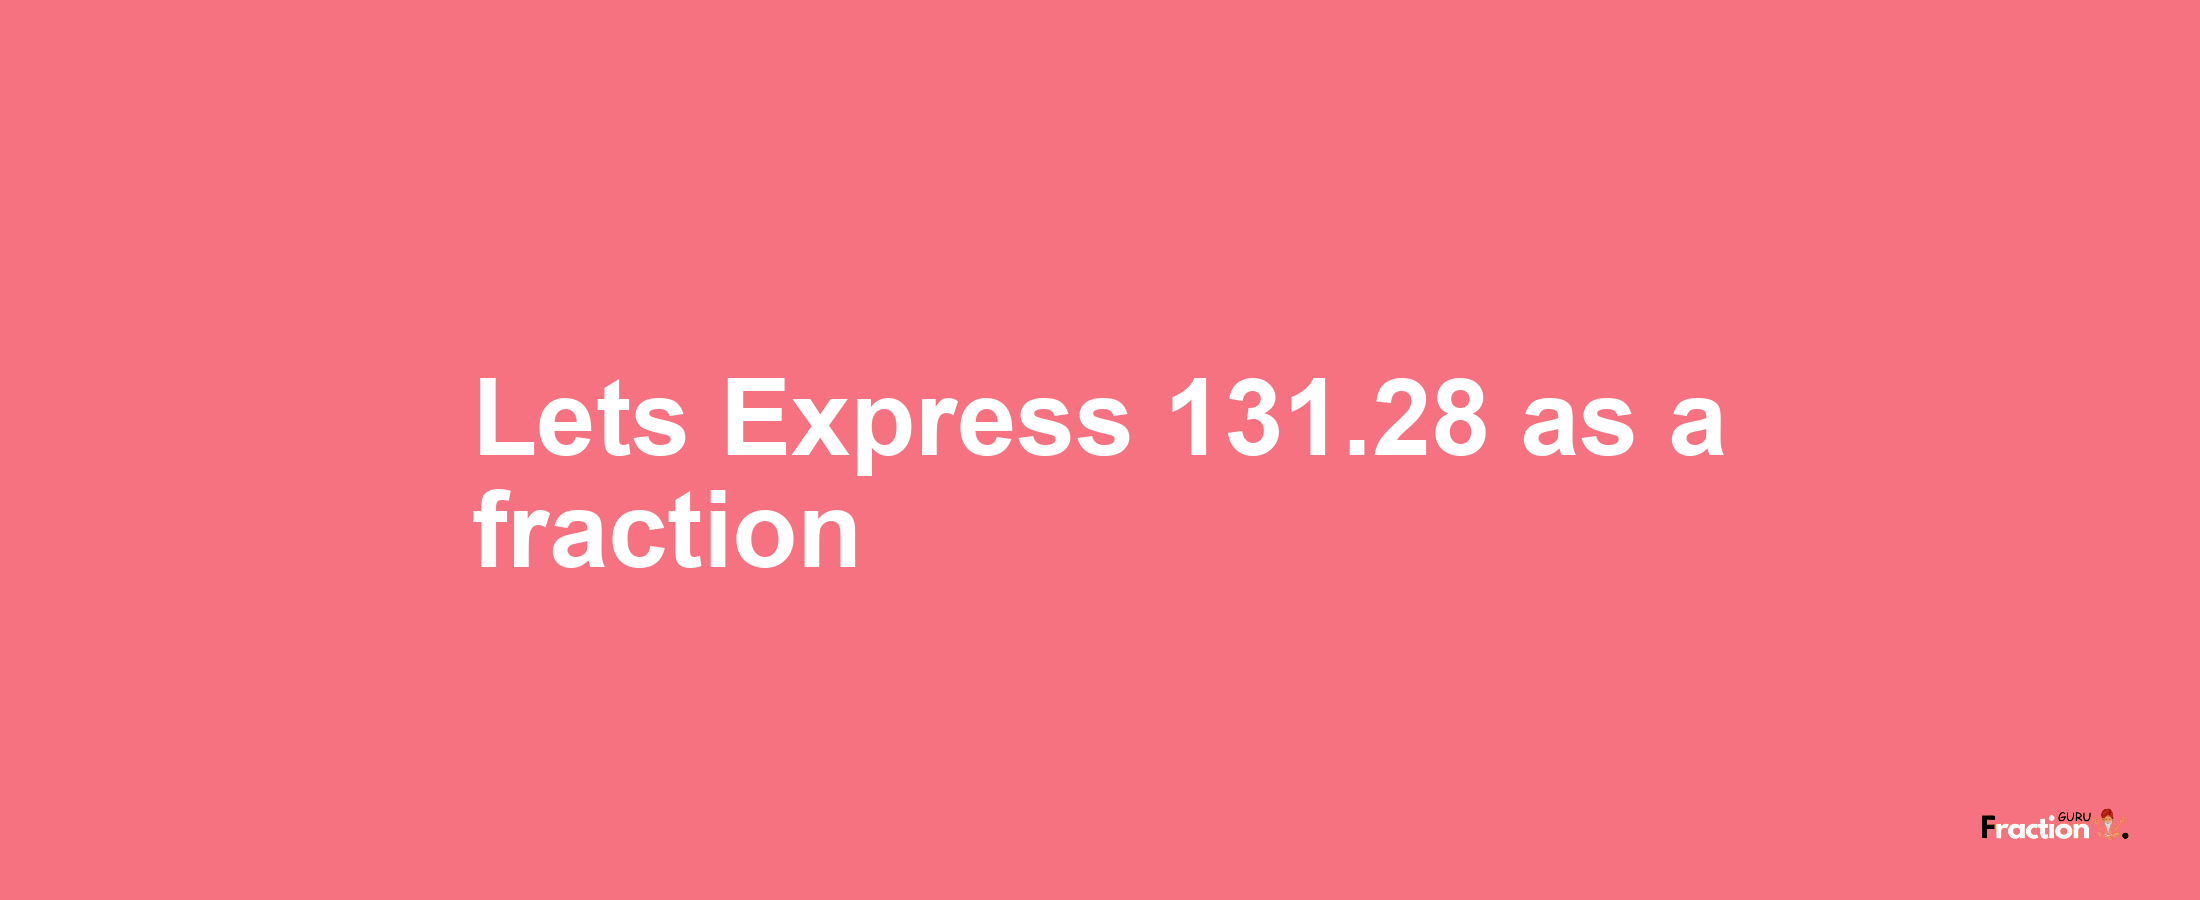 Lets Express 131.28 as afraction